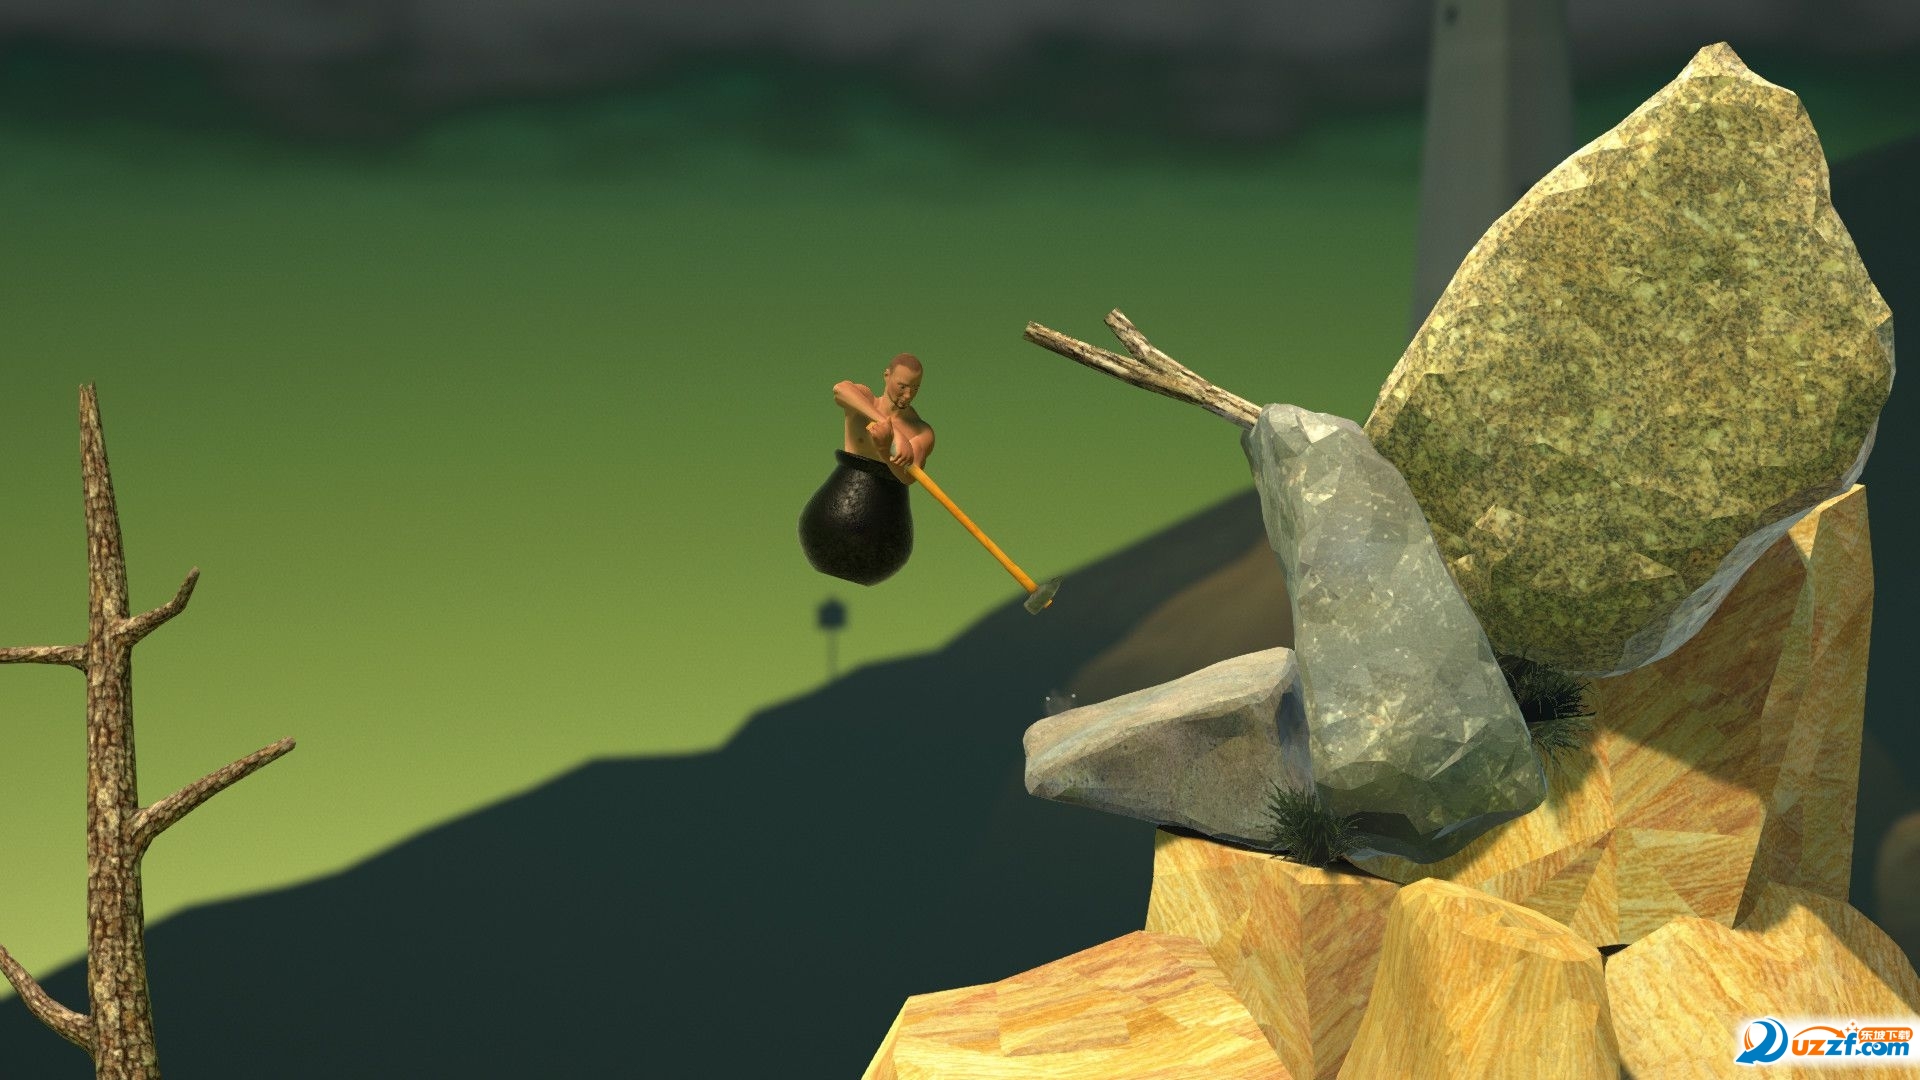 Getting Over Itͼ1